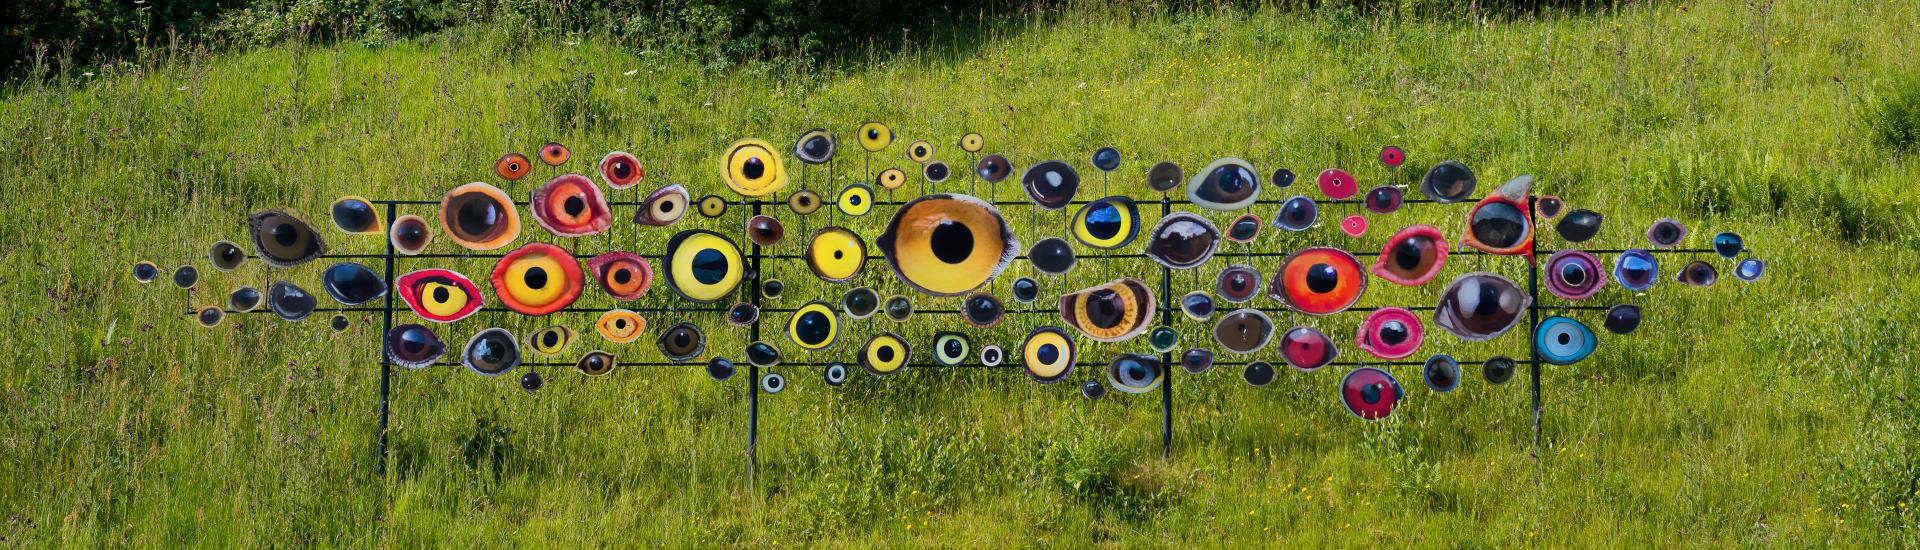 Reflective photographs of birds eyes mounted on a frame on a grass verge